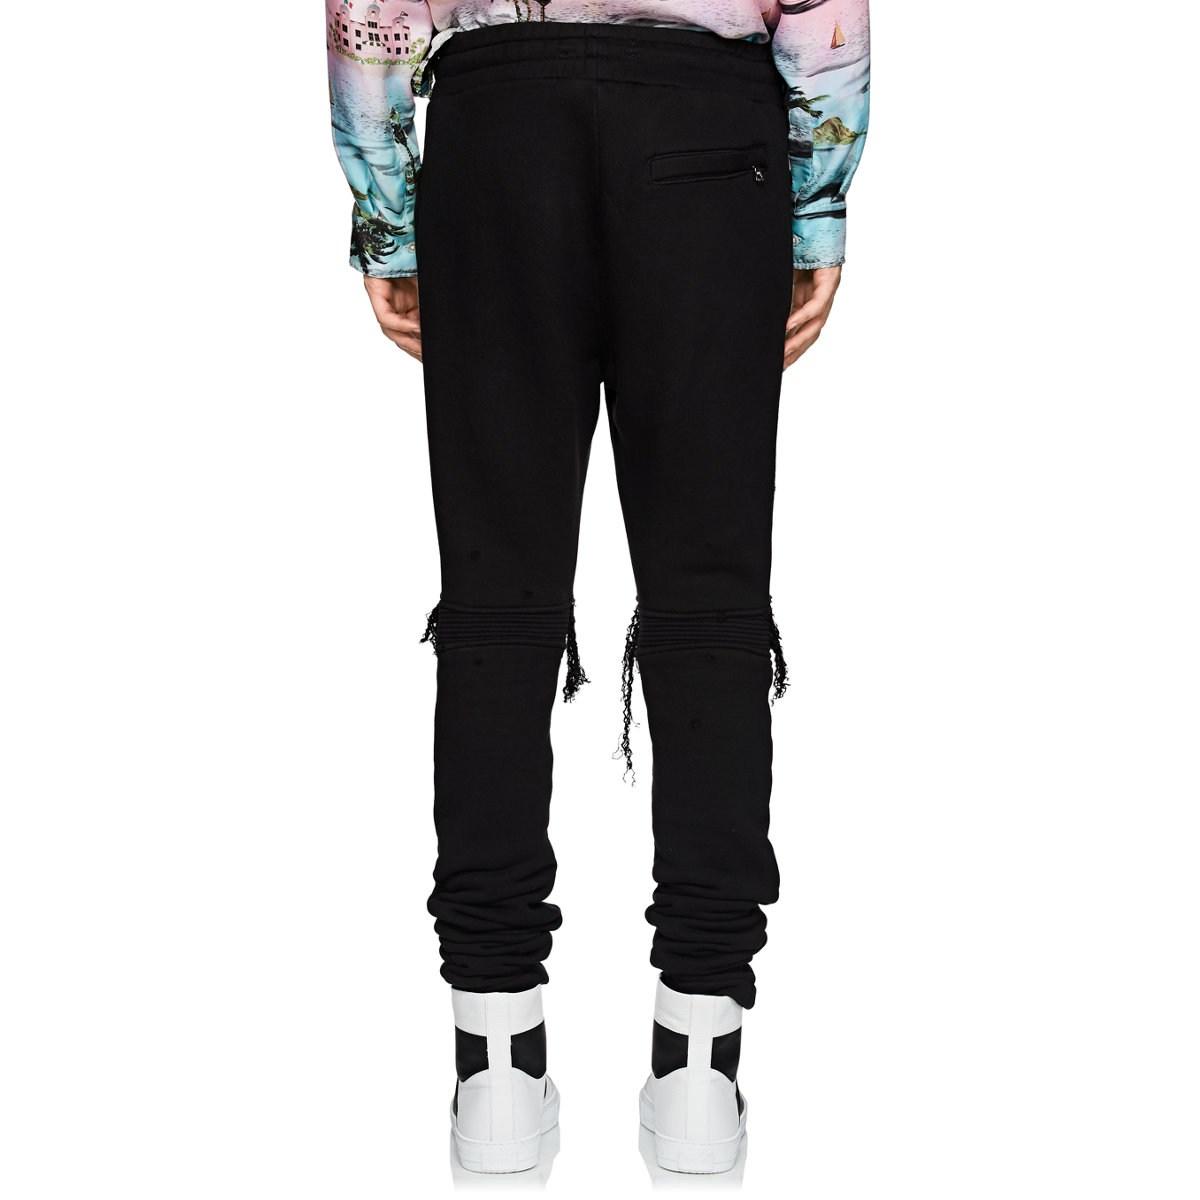 Amiri Grained-inset Jogger Pants in Black for Men - Lyst